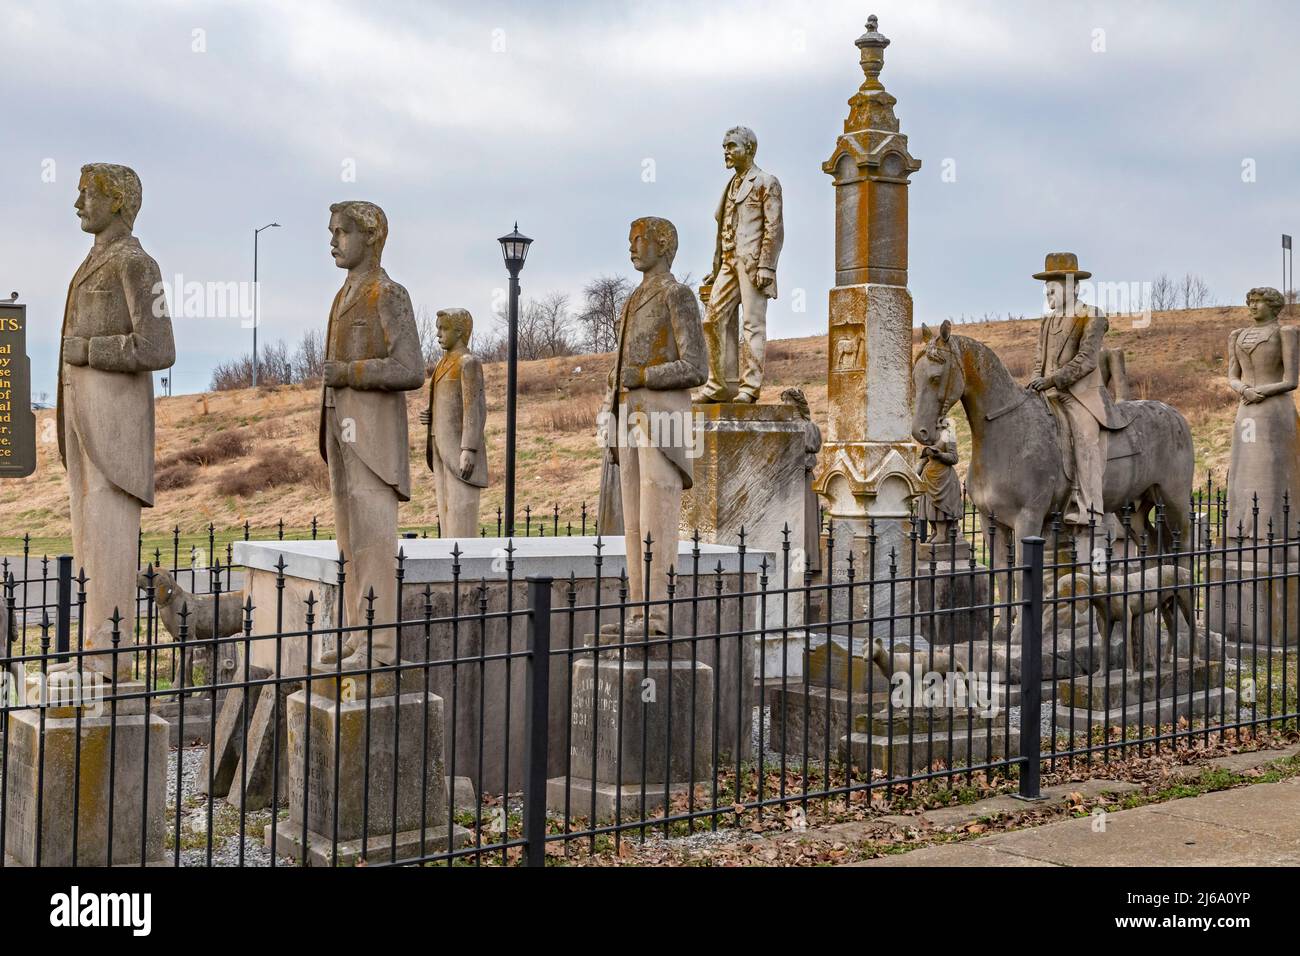 Mayfield, Kentucky - The Wooldridge Monuments in Maplewood Cemetery. Colonel Henry Wooldridge had statues erected in the 1890s of friends and family, Stock Photo